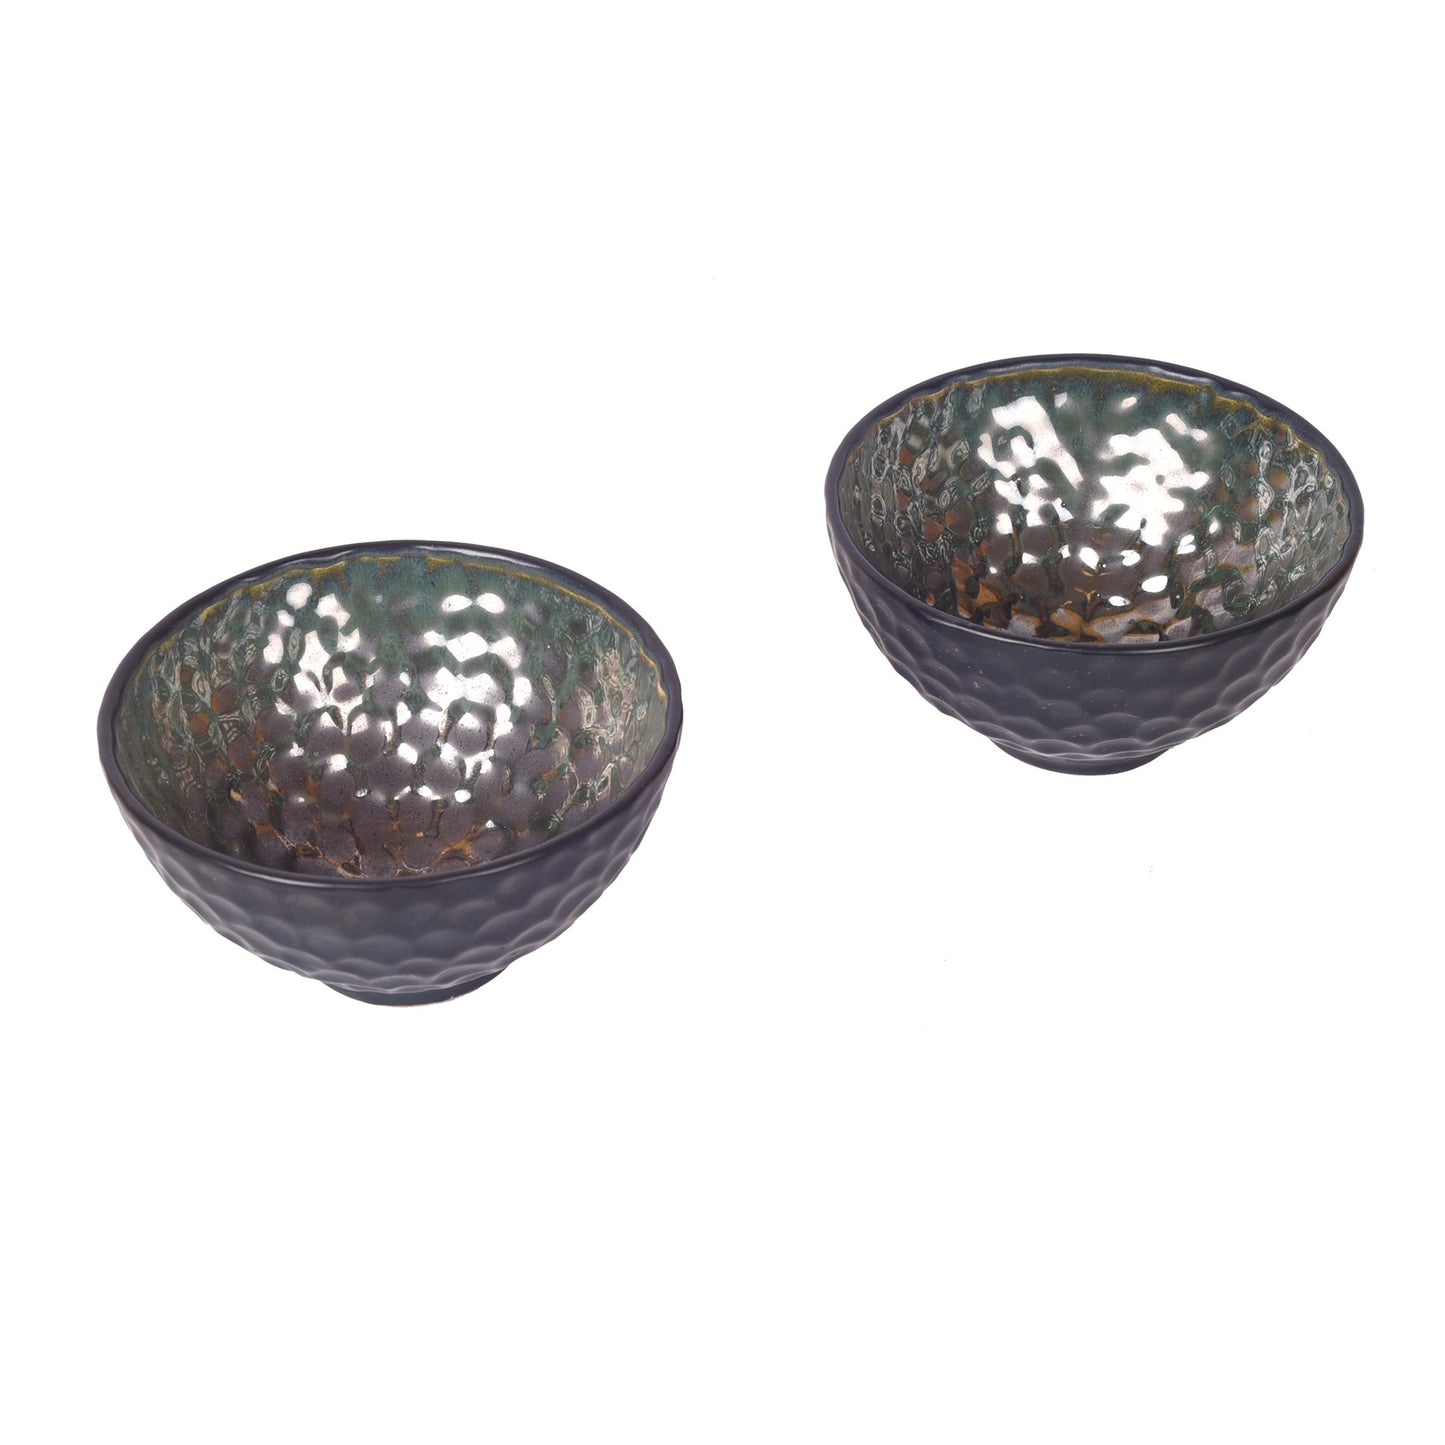 Crater Snacking Bowls Set of 2, Black